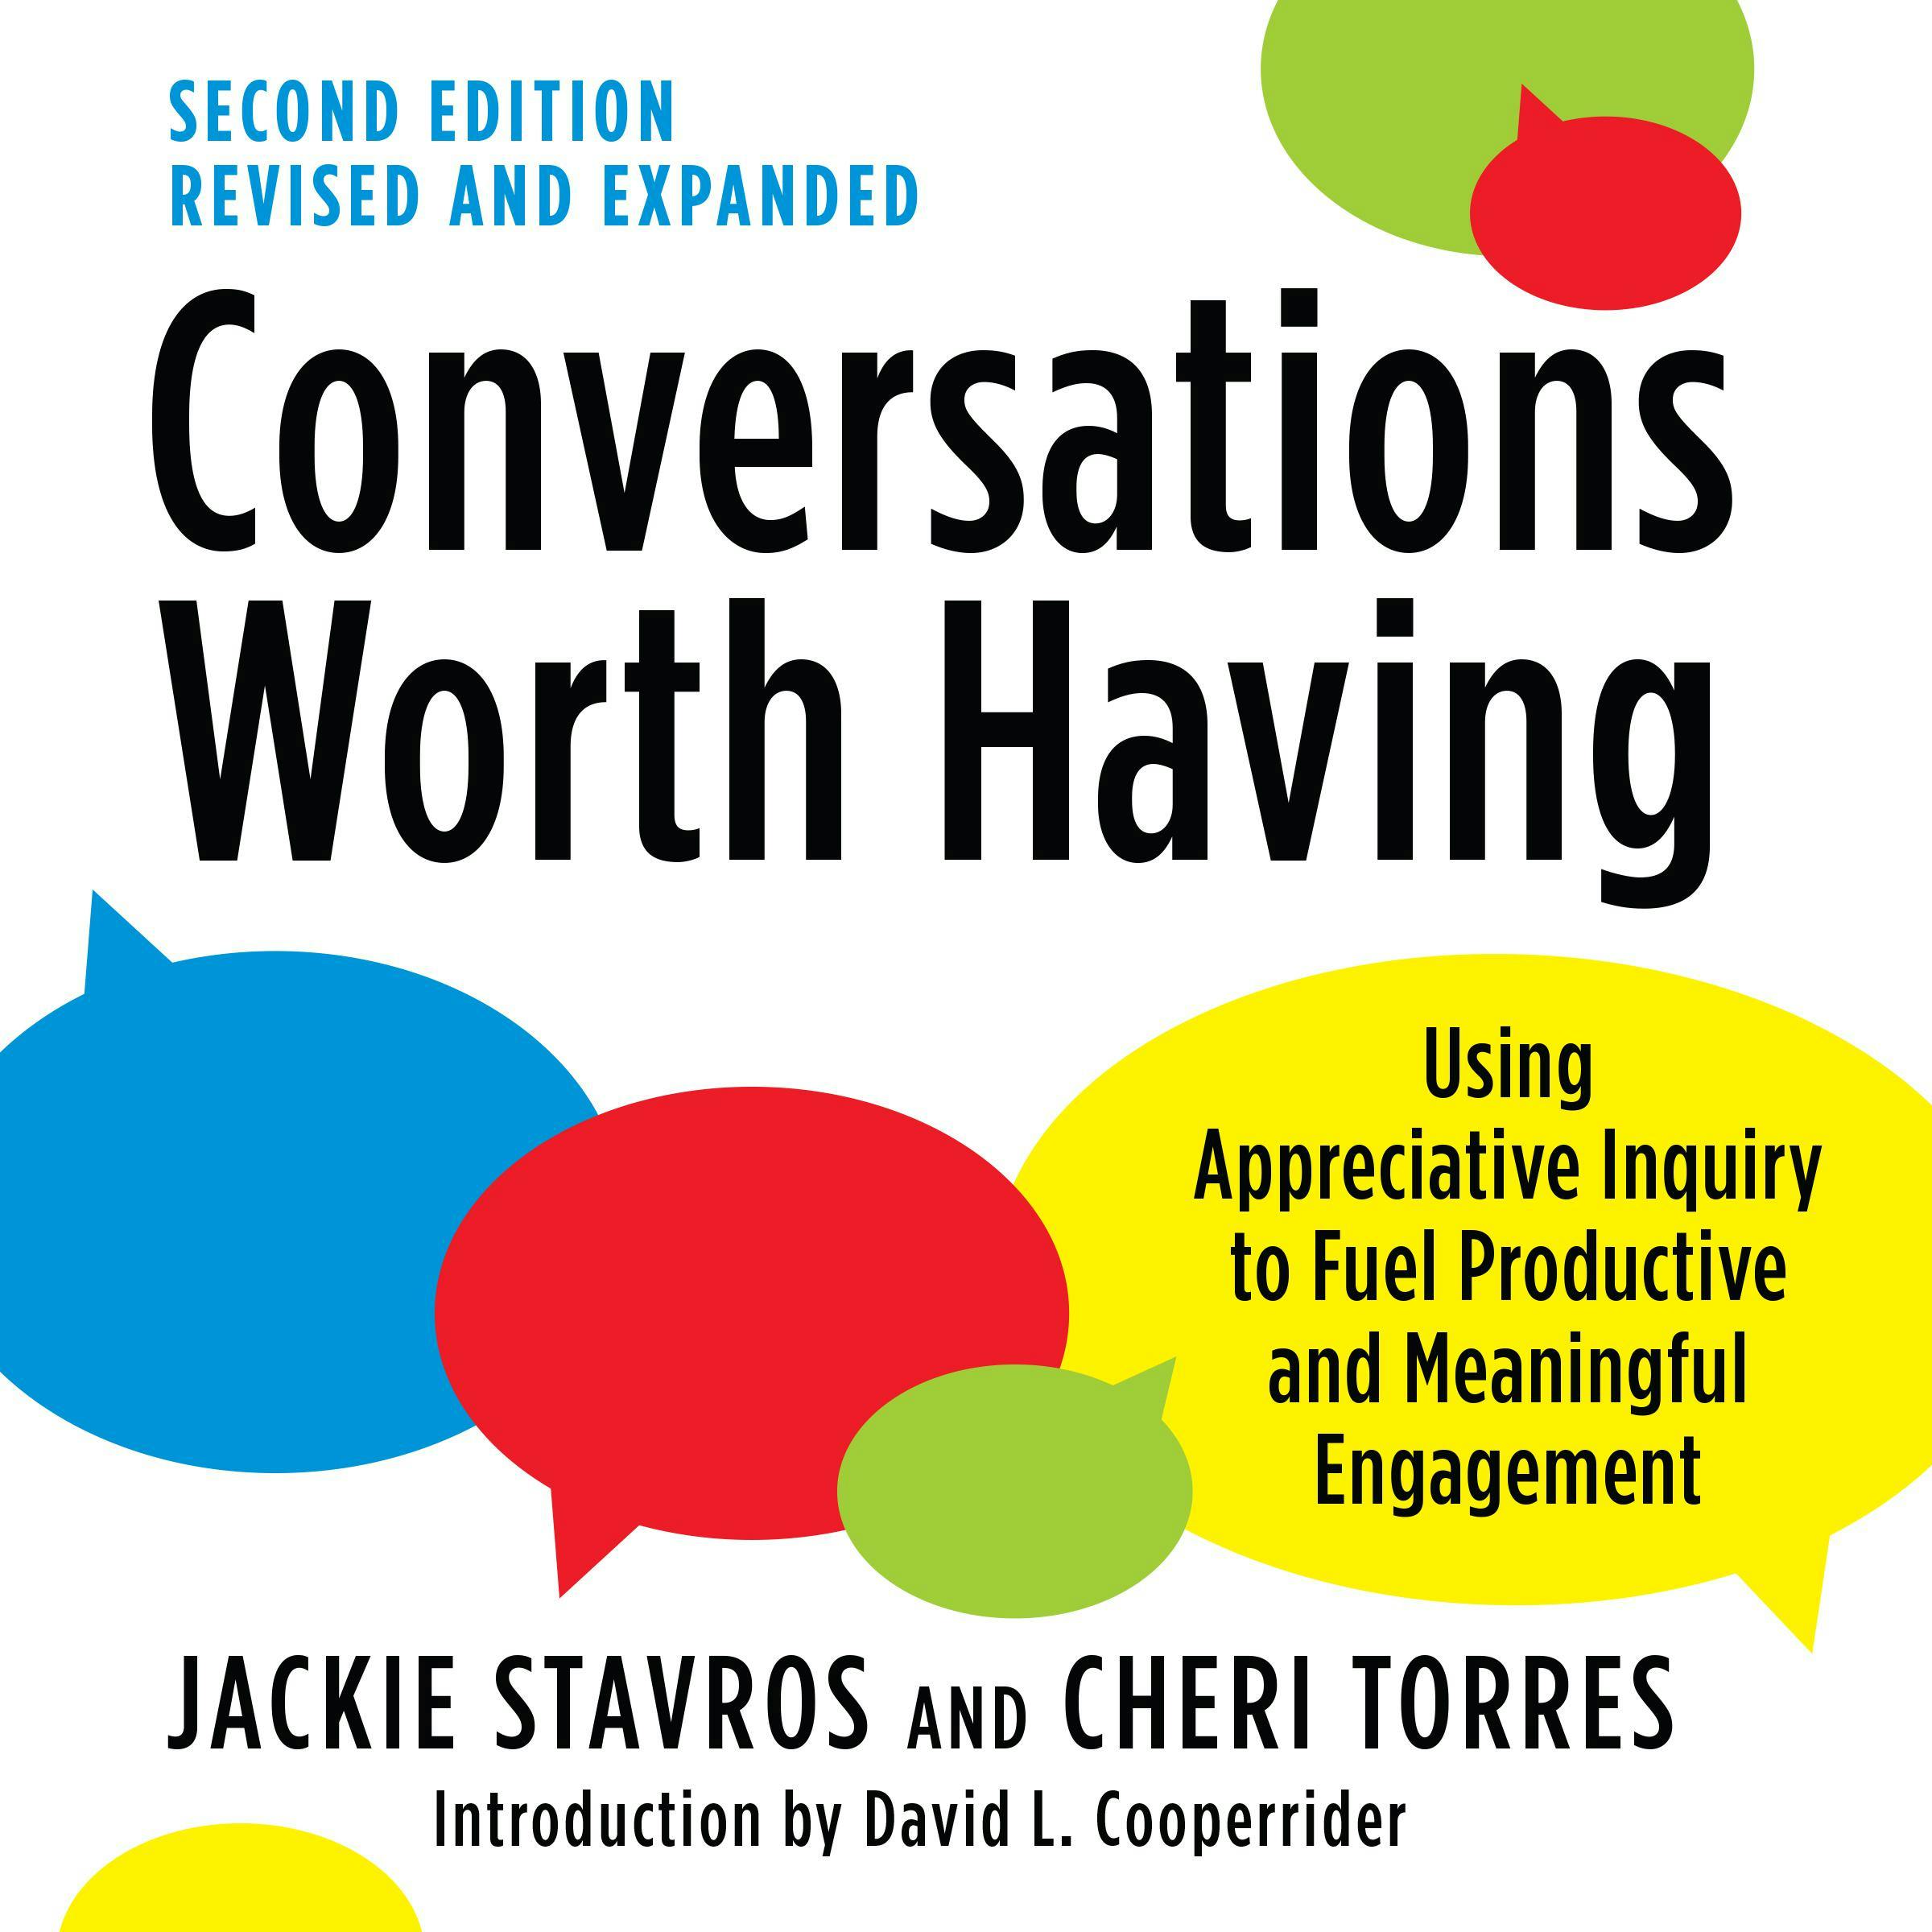 Conversations Worth Having, Second Edition: Using Appreciative Inquiry to Fuel Productive and Meaningful Engagement - David L. Cooperrider, Cheri Torres, Jackie Stavros